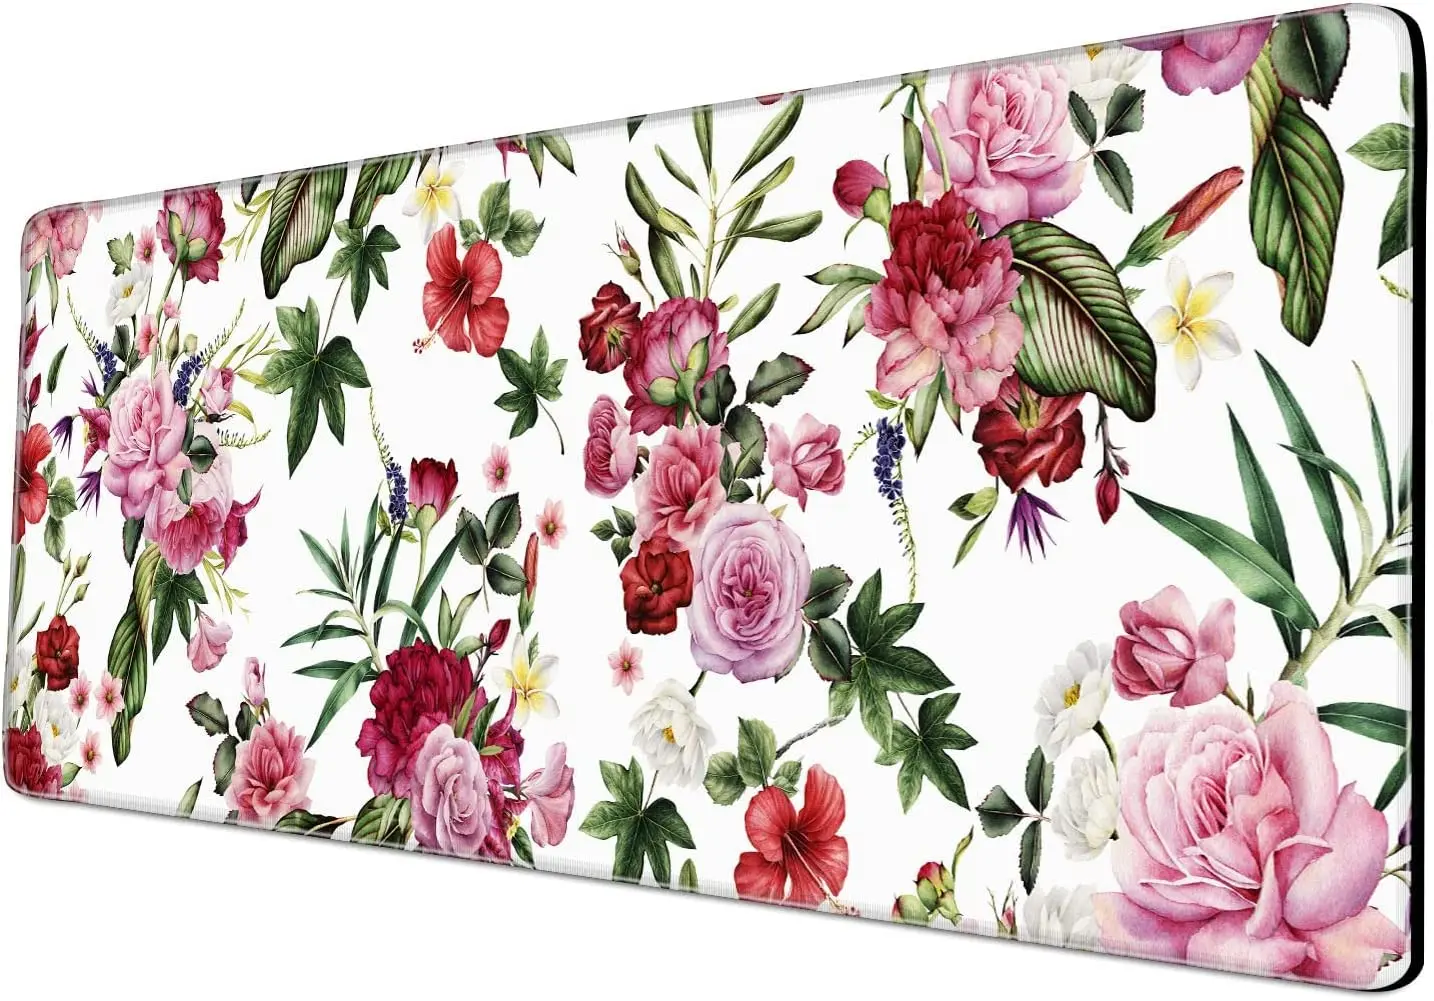 

Extended Mouse Pad Large Gaming Mouse Pad 31.5x11.8x0.12 inch Mouse Mat Non-Slip Rubber Base and Stitched Edges - Rose Flower